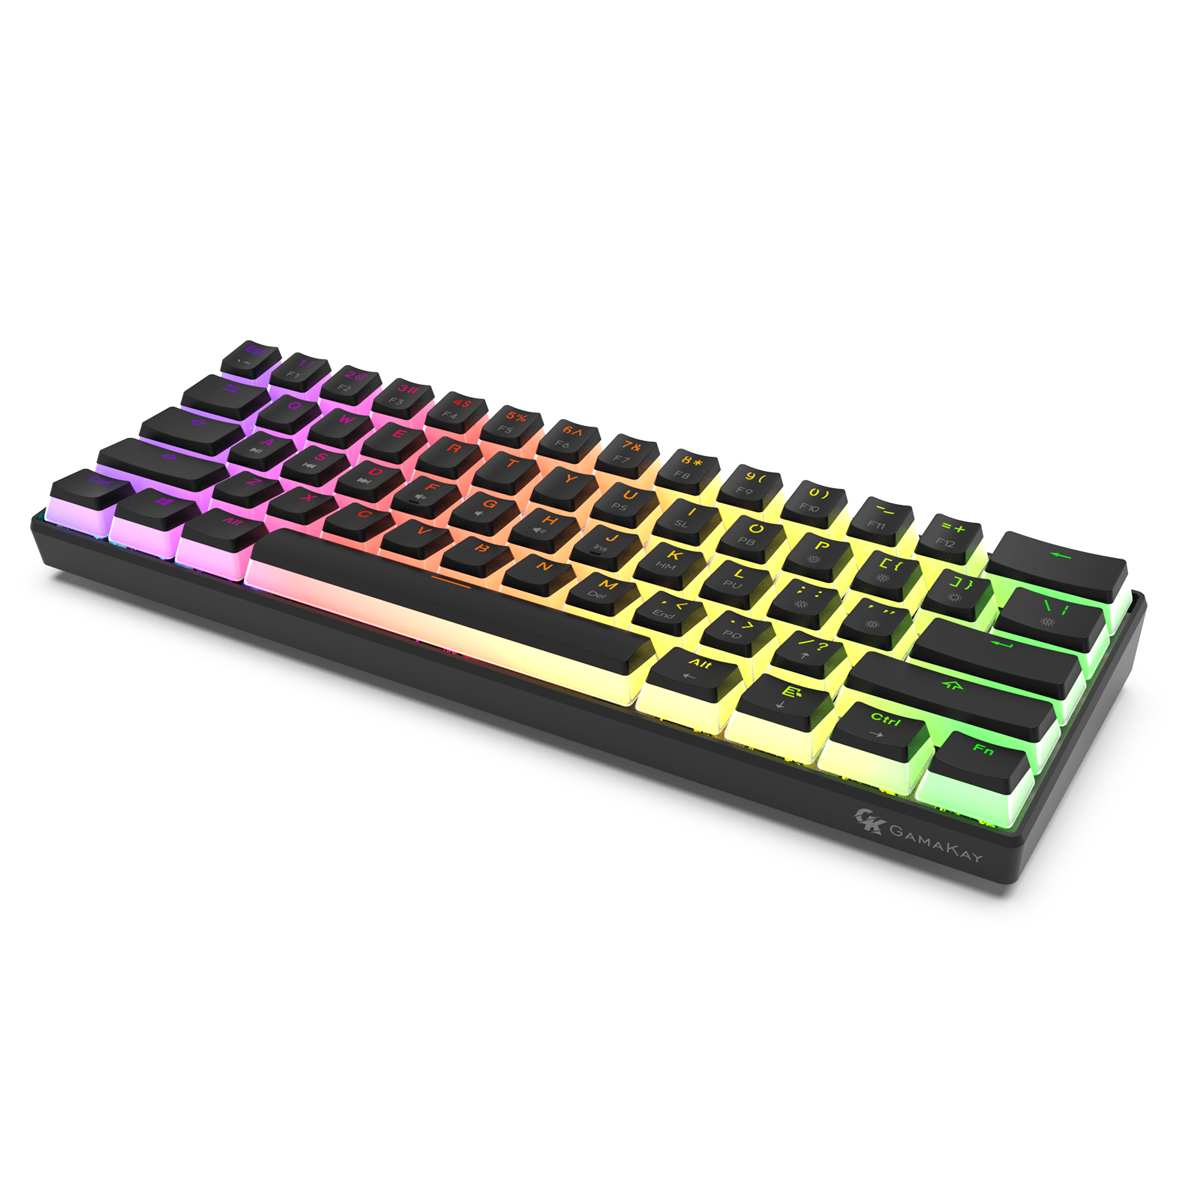 GAMAKAY MK61 Wired Mechanical Keyboard Gateron Optical Switch Pudding Keycaps RGB 61 Keys Hot Swappable Gaming Keyboard New Version COD